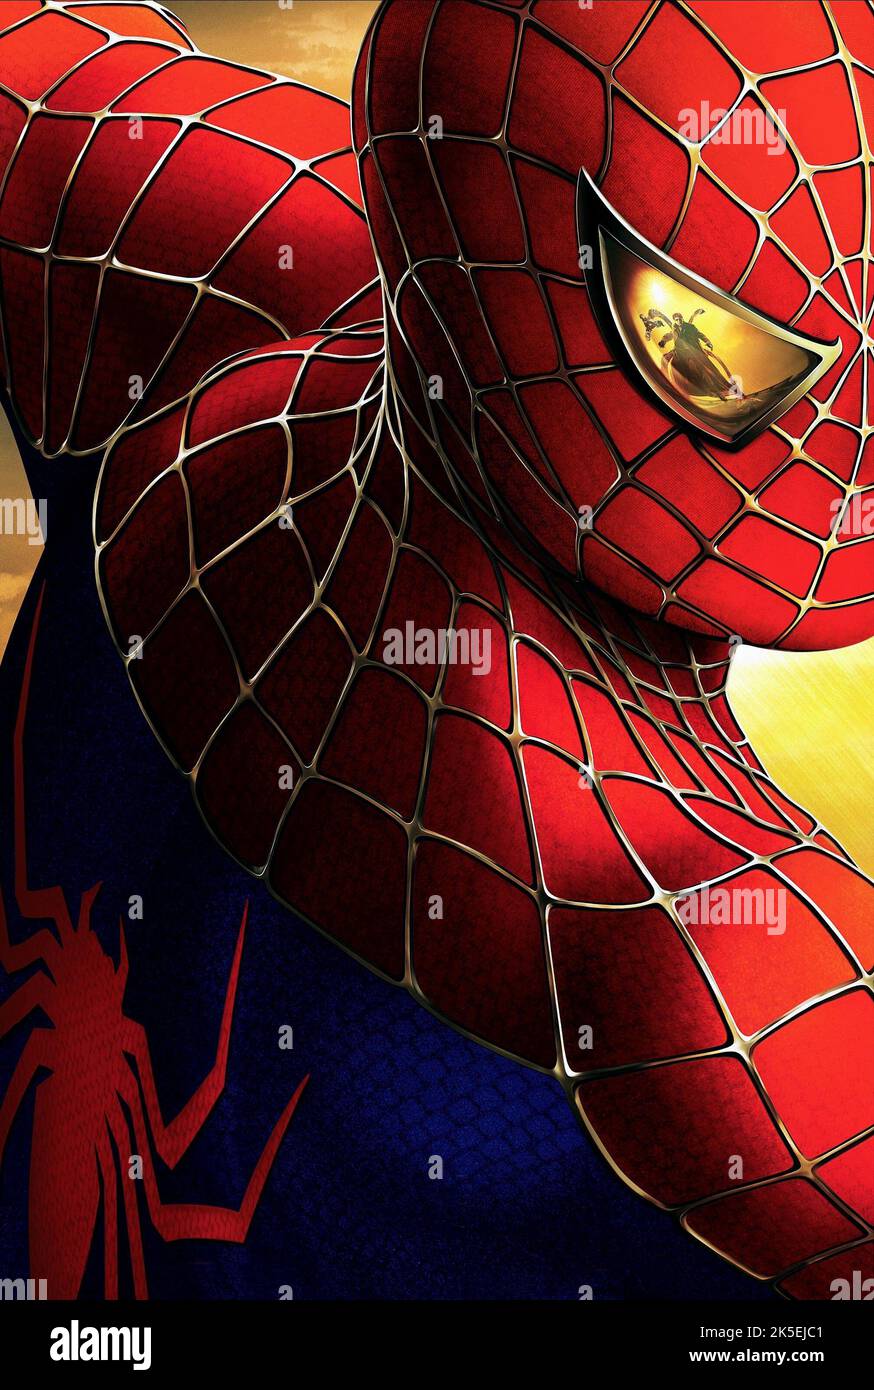 TOBEY MAGUIRE, ALFRED MOLINA, SPIDER-MAN 2, 2004 Stock Photo